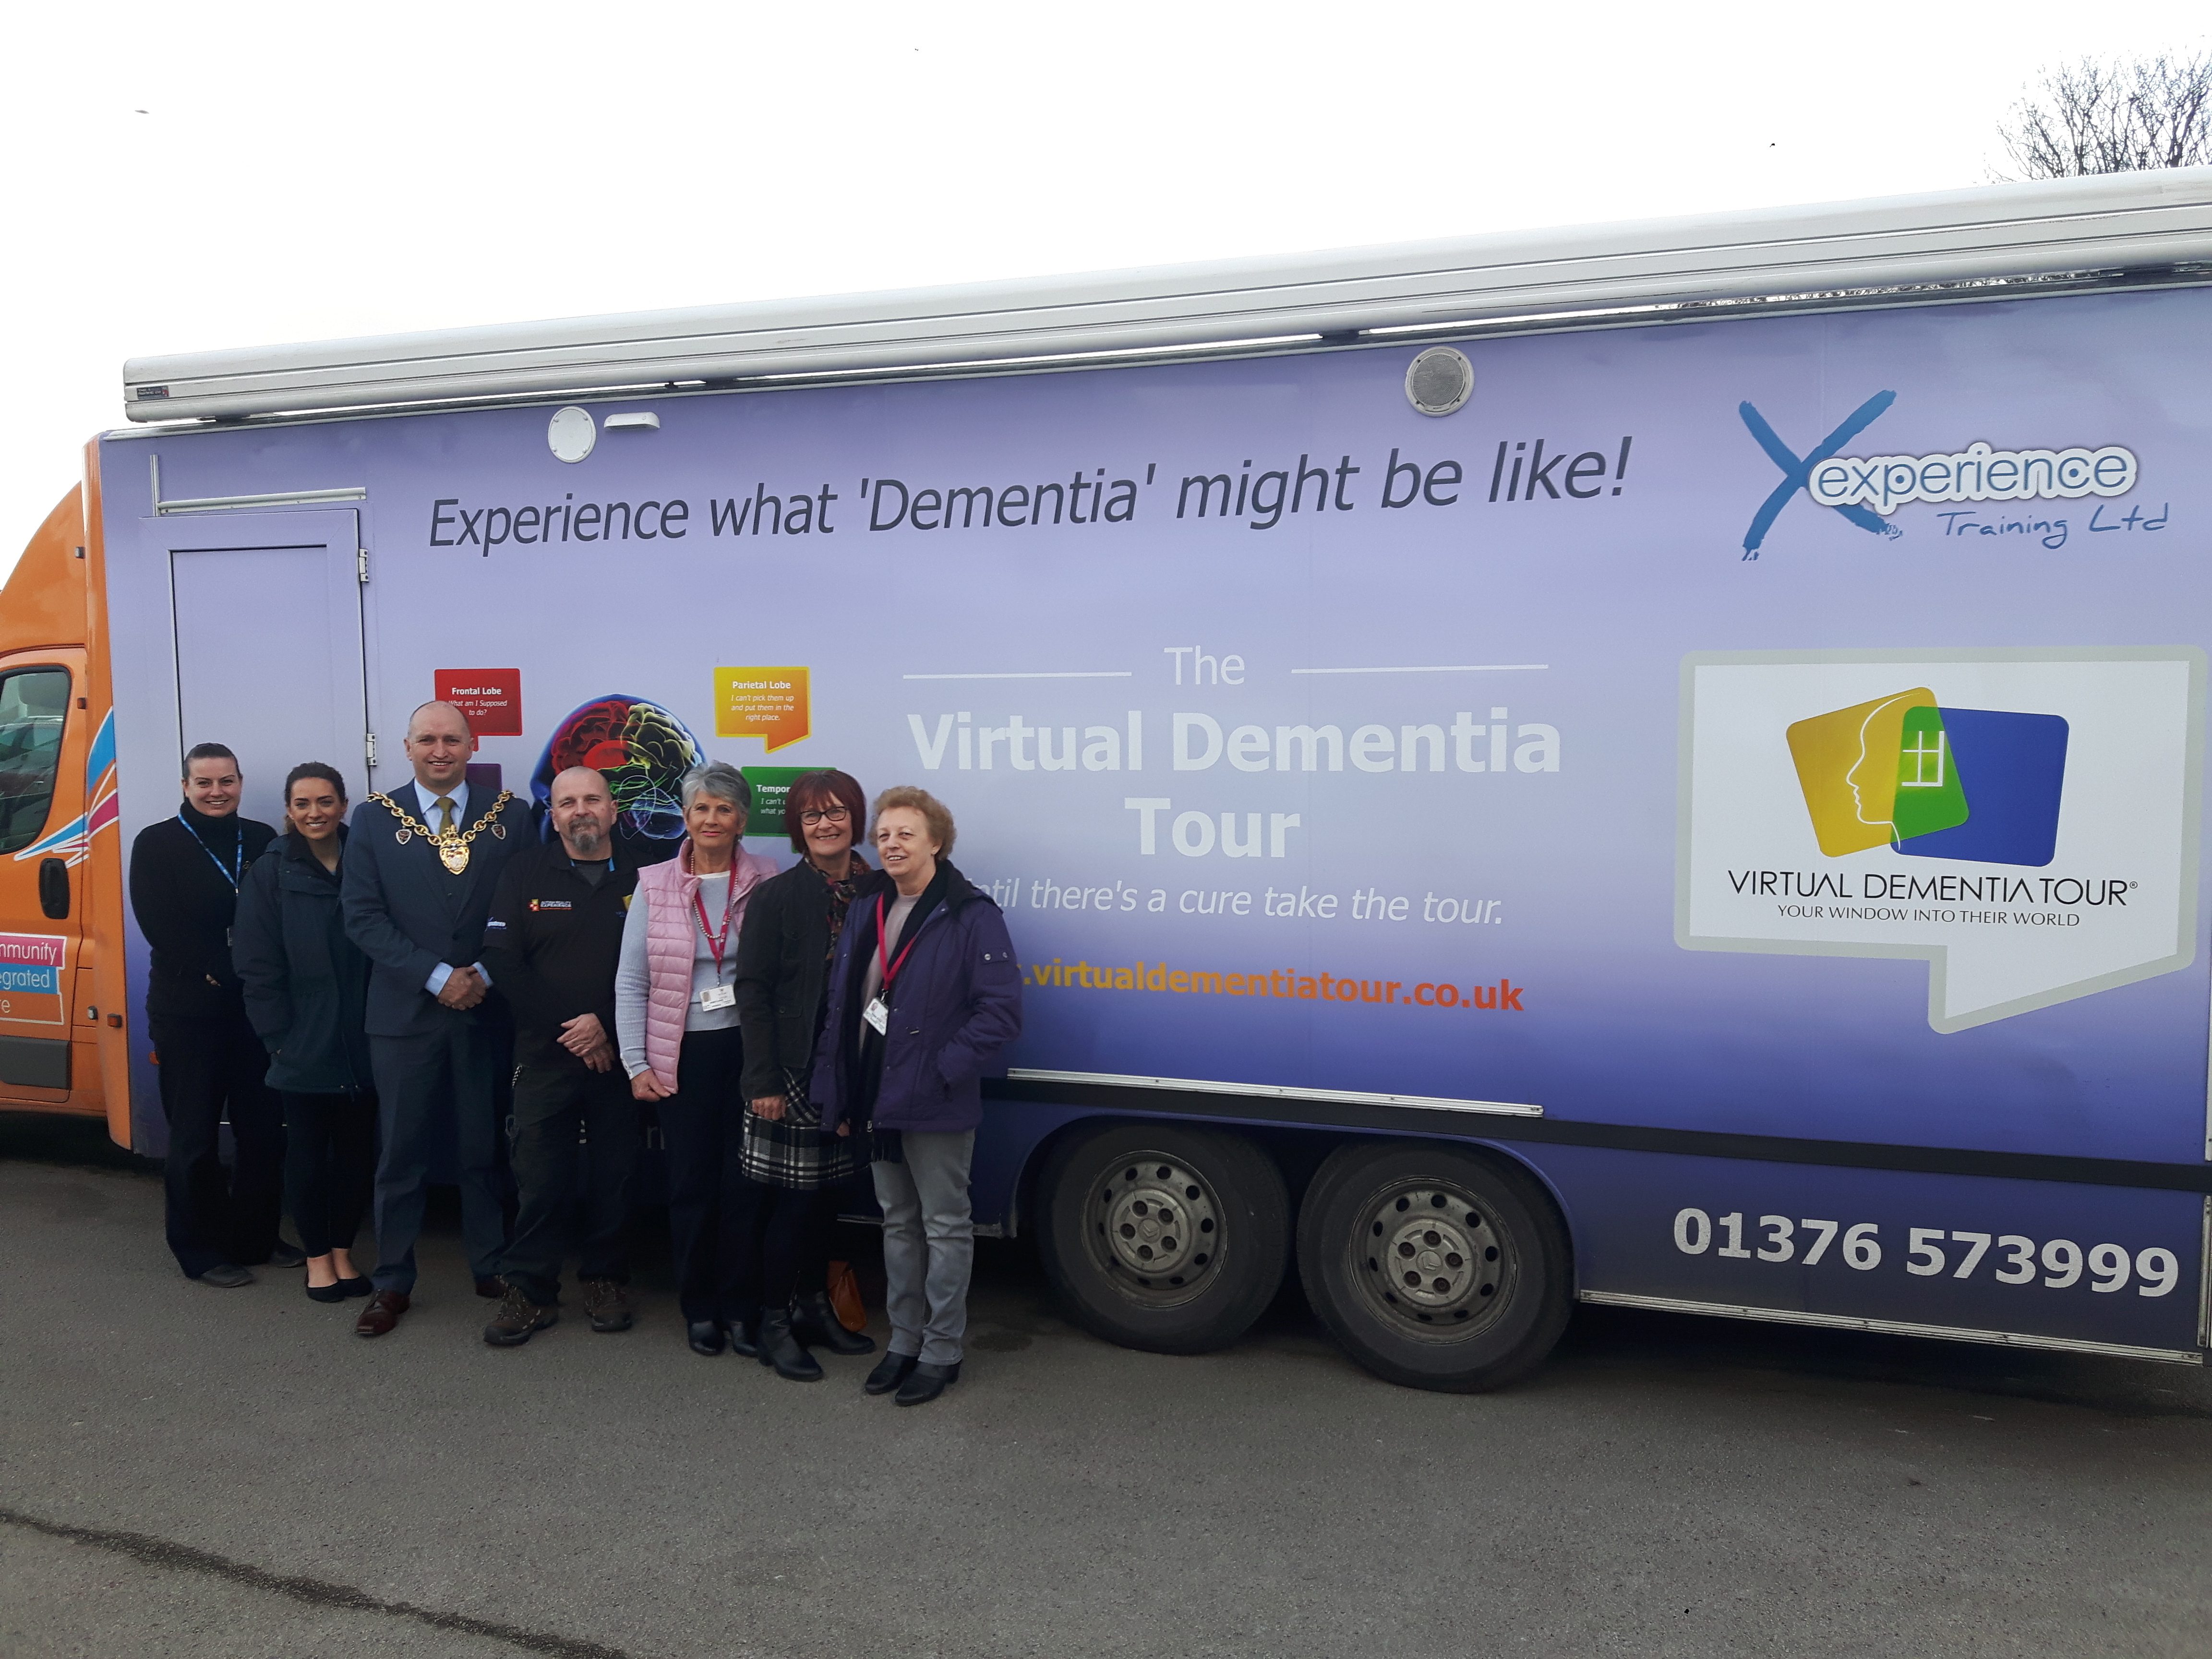 Would you like to learn more about how it feels to live with dementia?